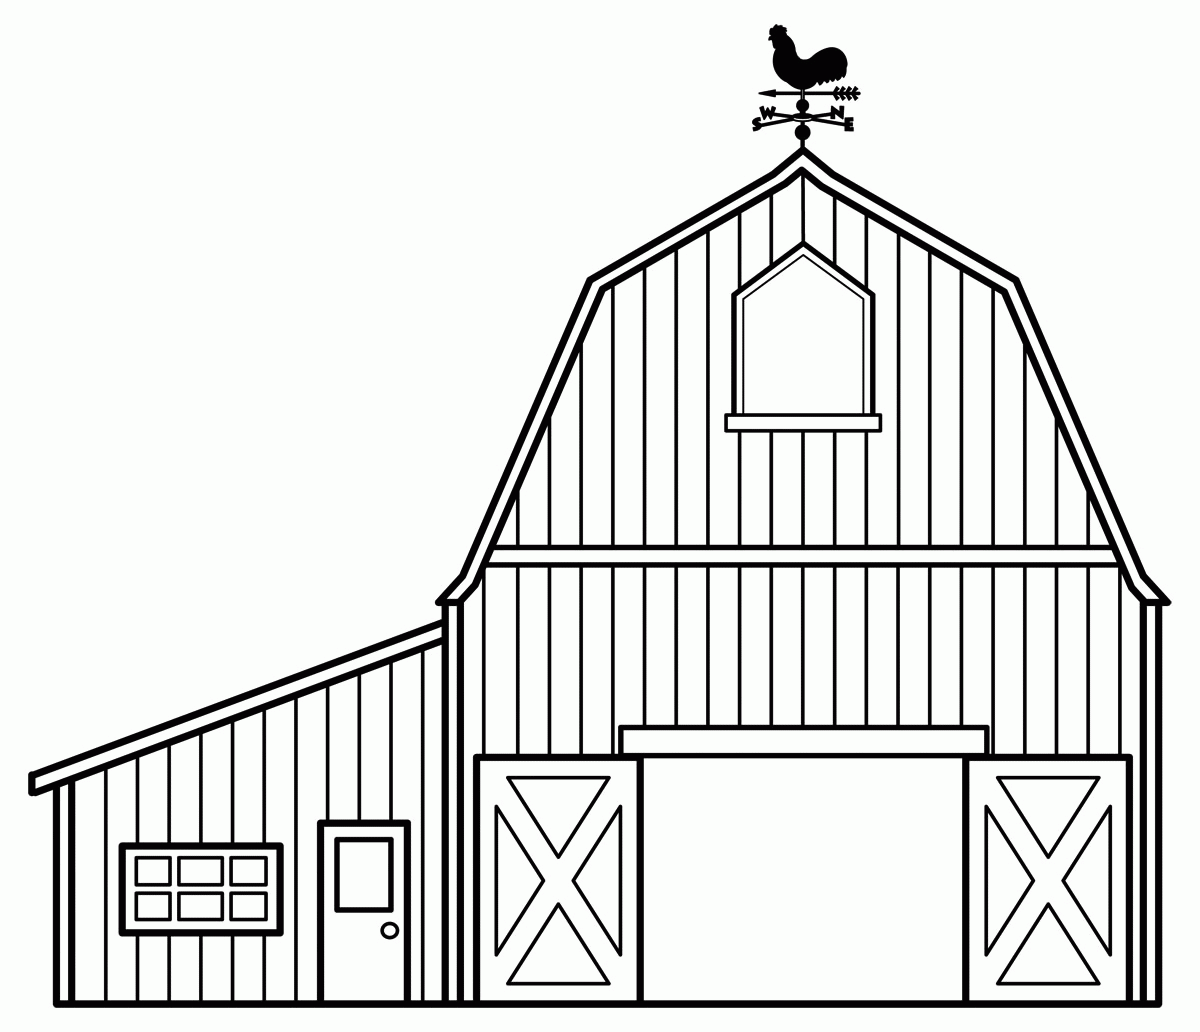 Barn Coloring Page - Coloring Pages for Kids and for Adults